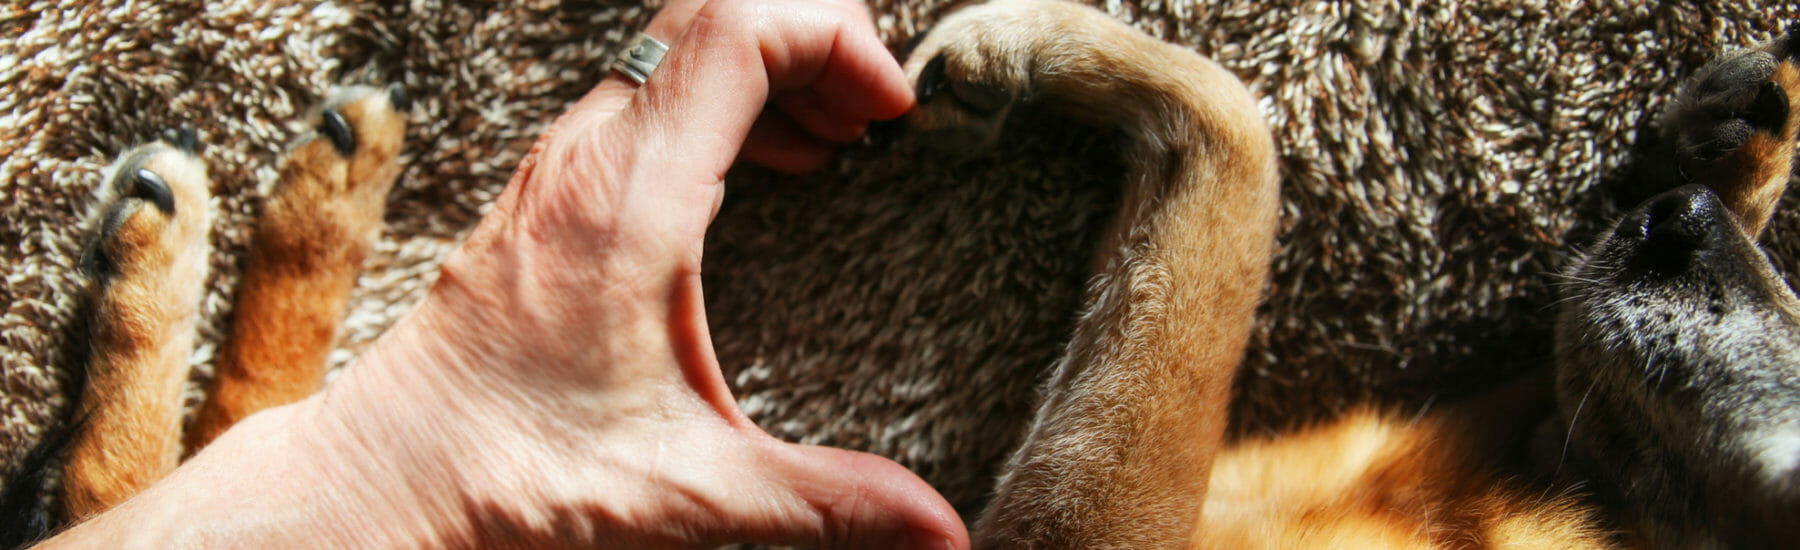 Hand of a person and dog paw forming the shape of a heart